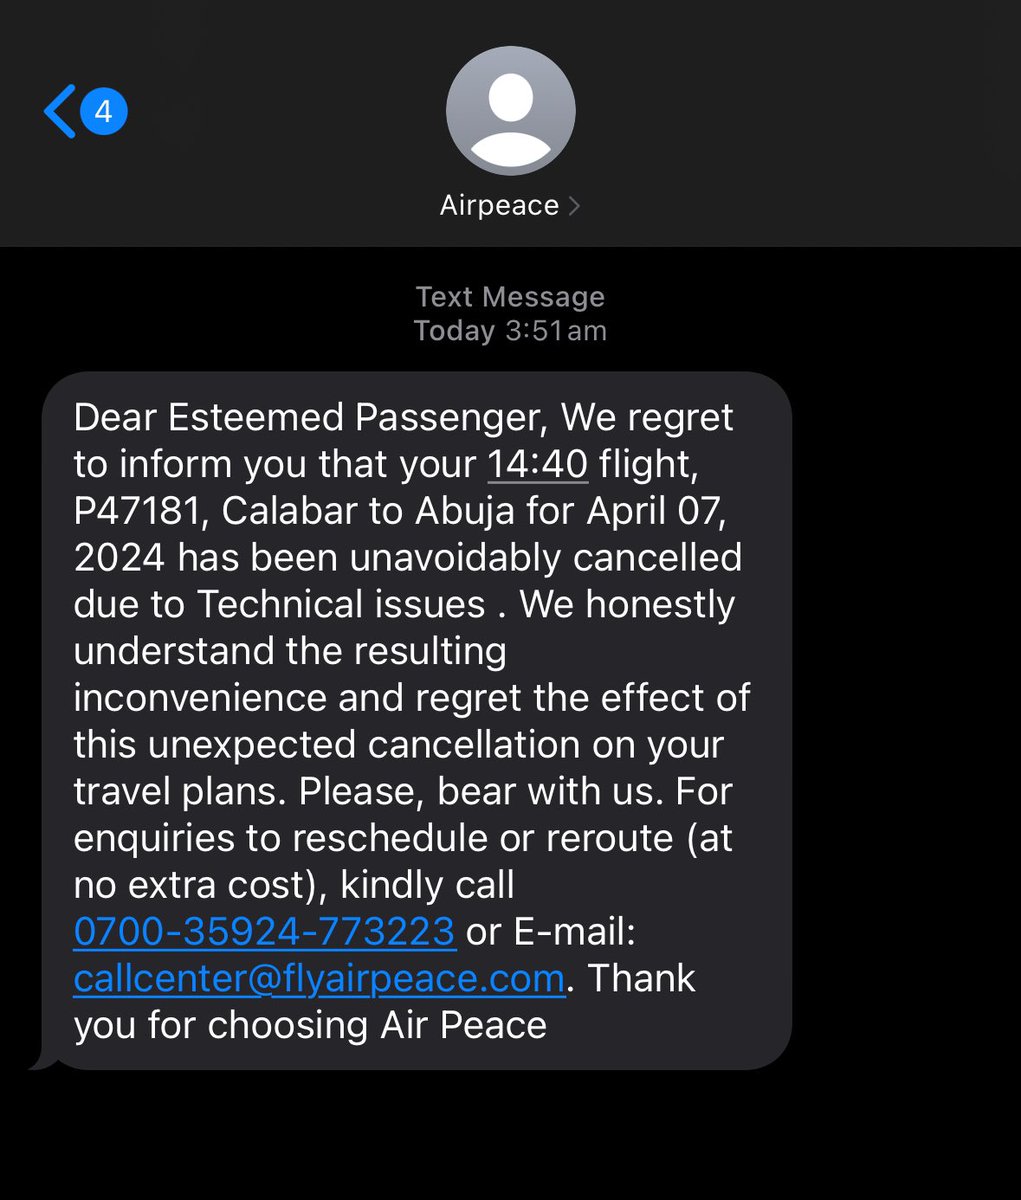 On the 7th of April @flyairpeace cancelled my flight to Abuja. I had to drive 4 hours to another state, then pay 200k to fly Ibom Air because I had to get to Abuja that same day (my flight out of Nigeria was the next morning).